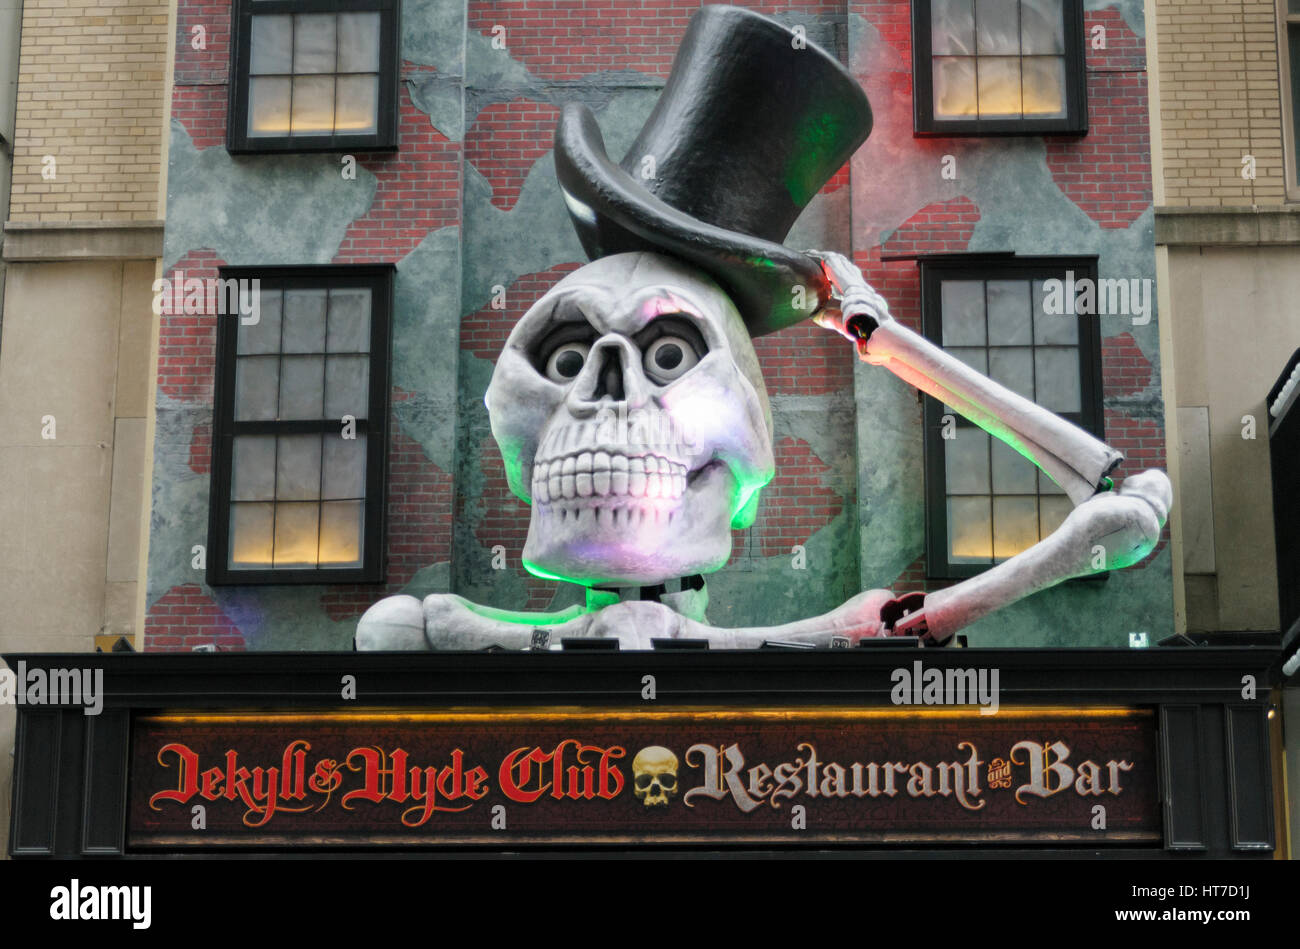 Facade of the Jekyll & Hyde Club restaurant, Times Square, NYC, USA Stock Photo